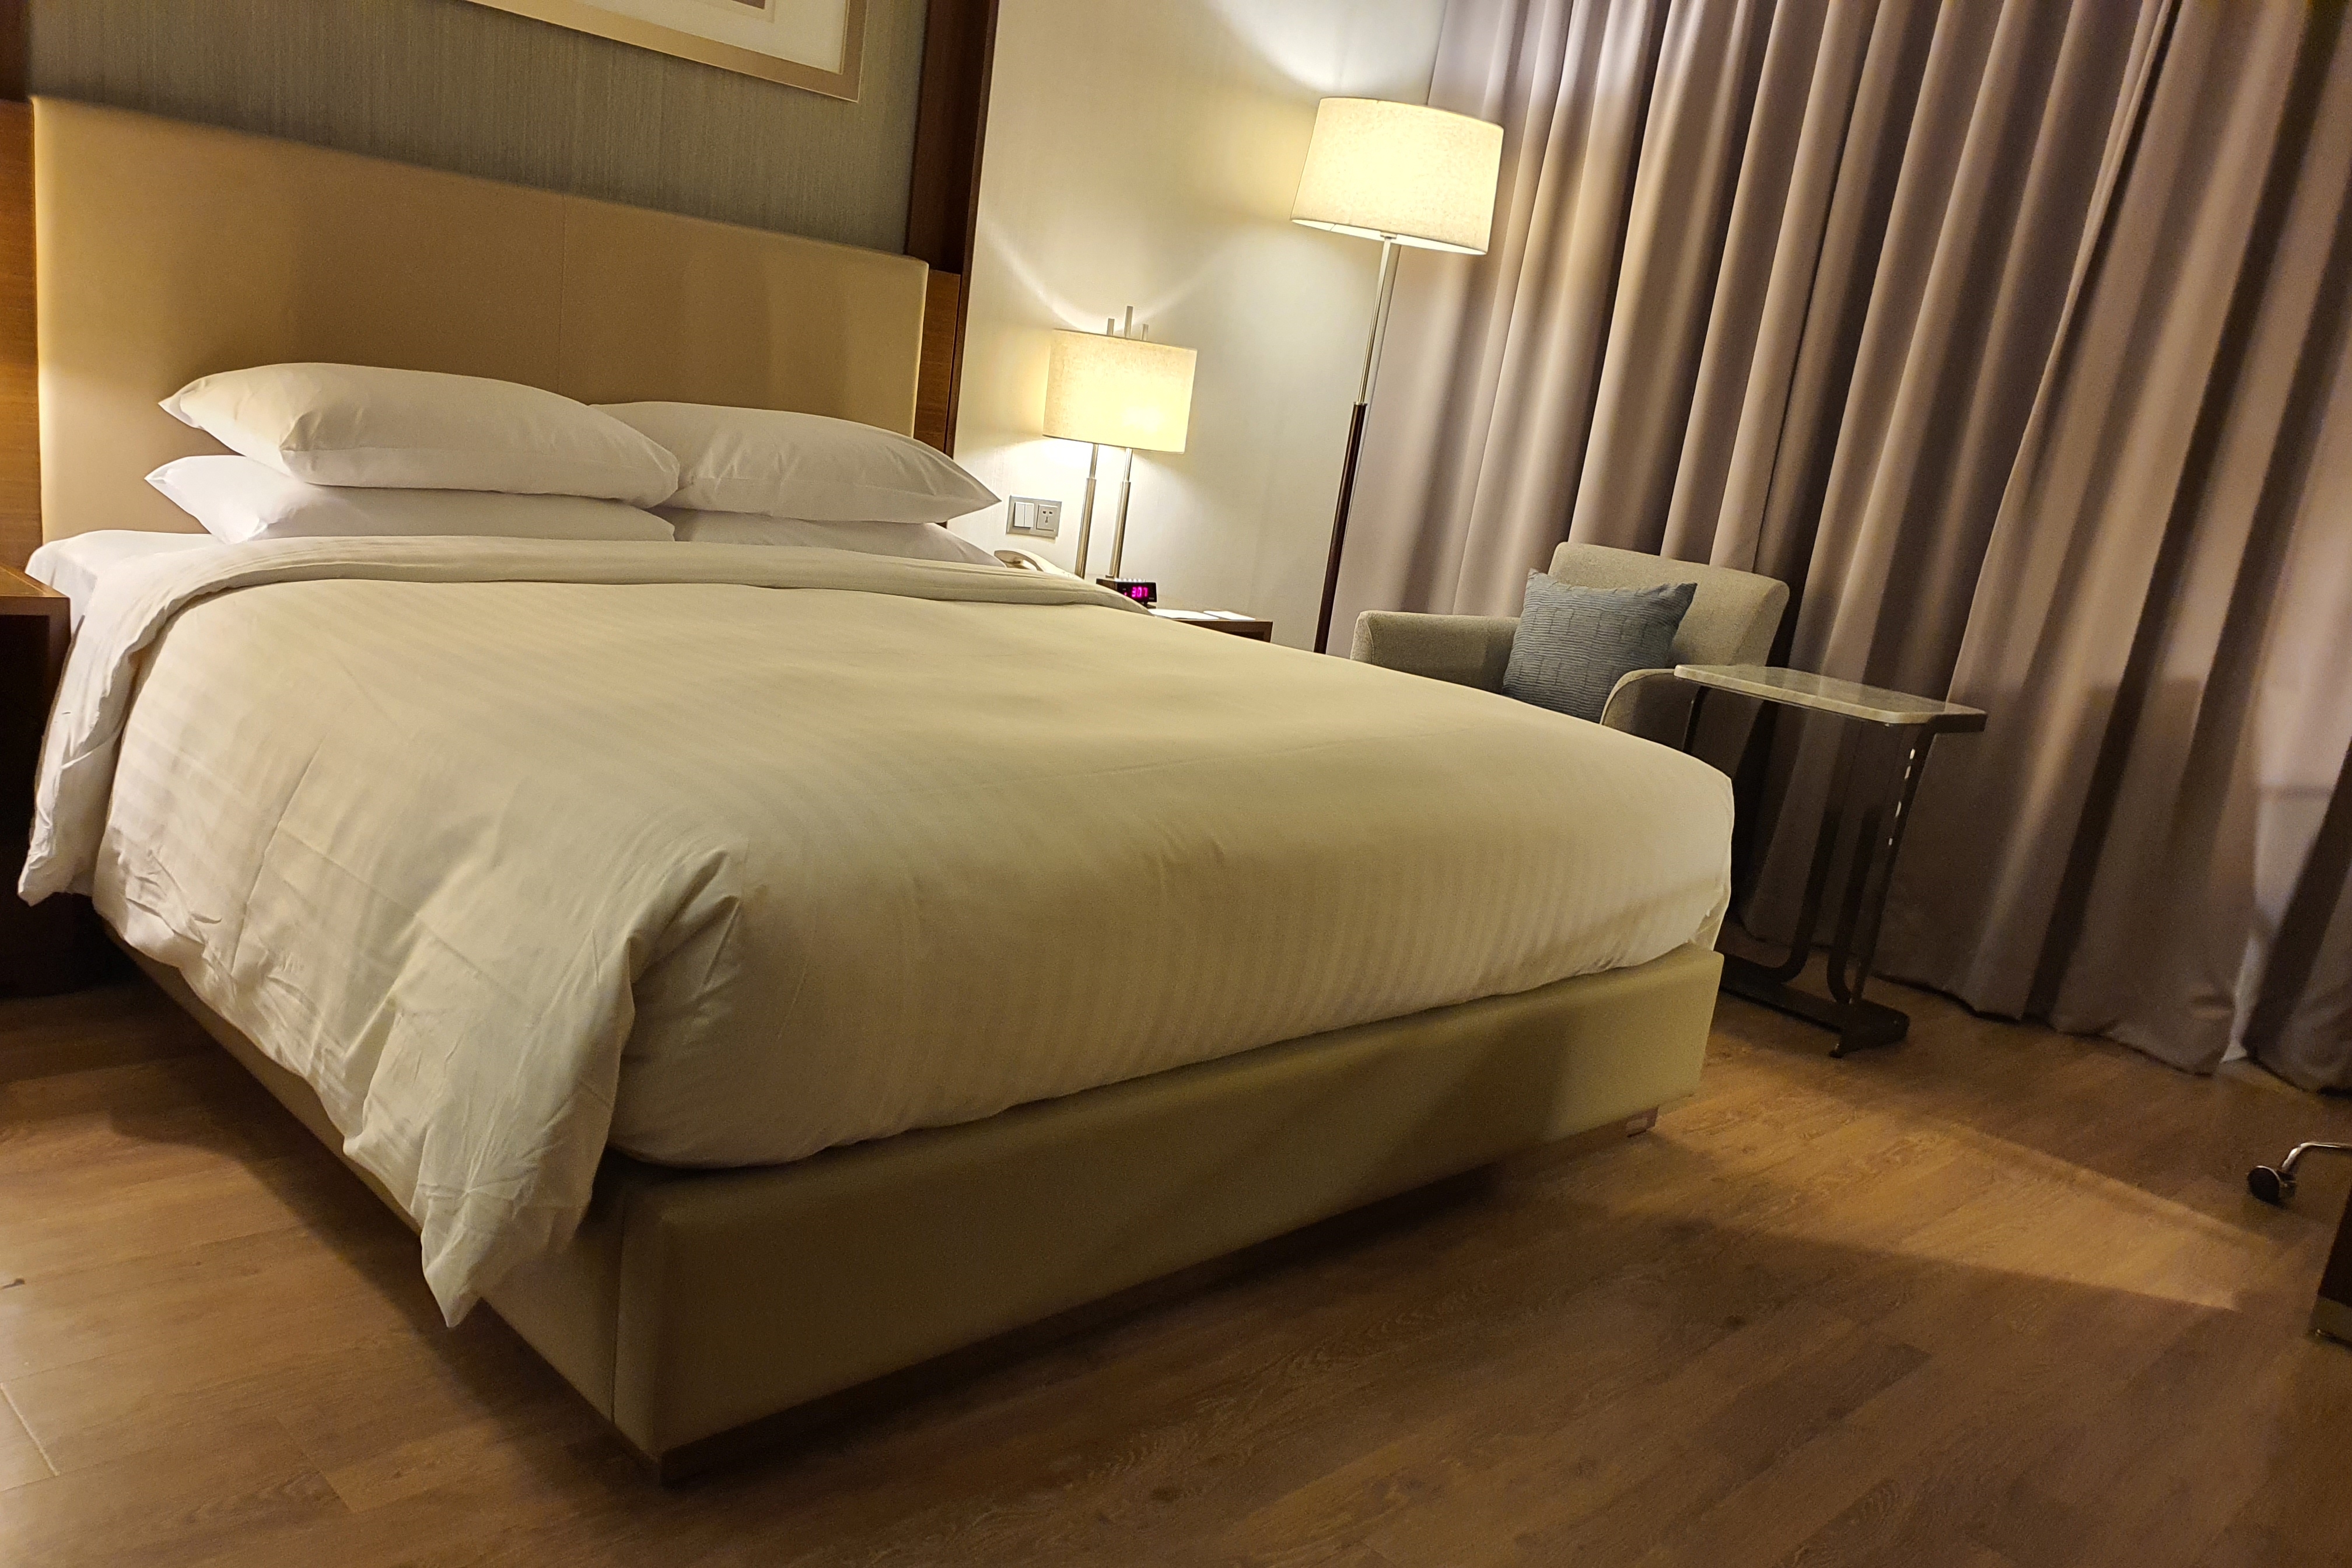 Courtyard by Marriott Seoul Times Square3 : Cozy hotel room with soft lighting